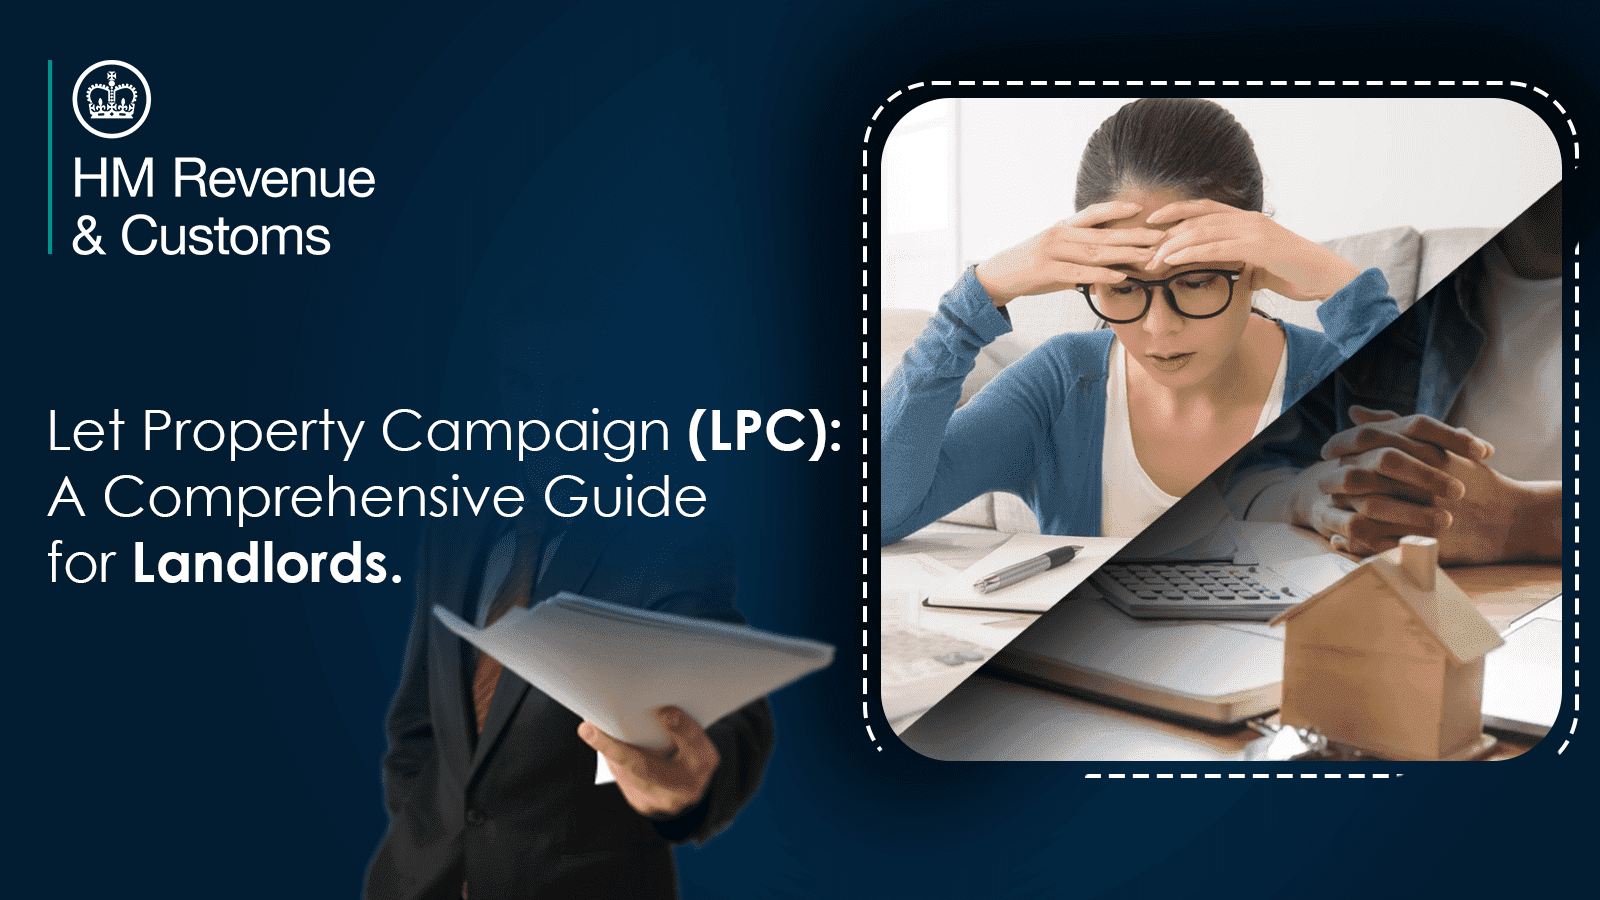 Let Property Campaign (LPC): A Comprehensive Guide for Landlords